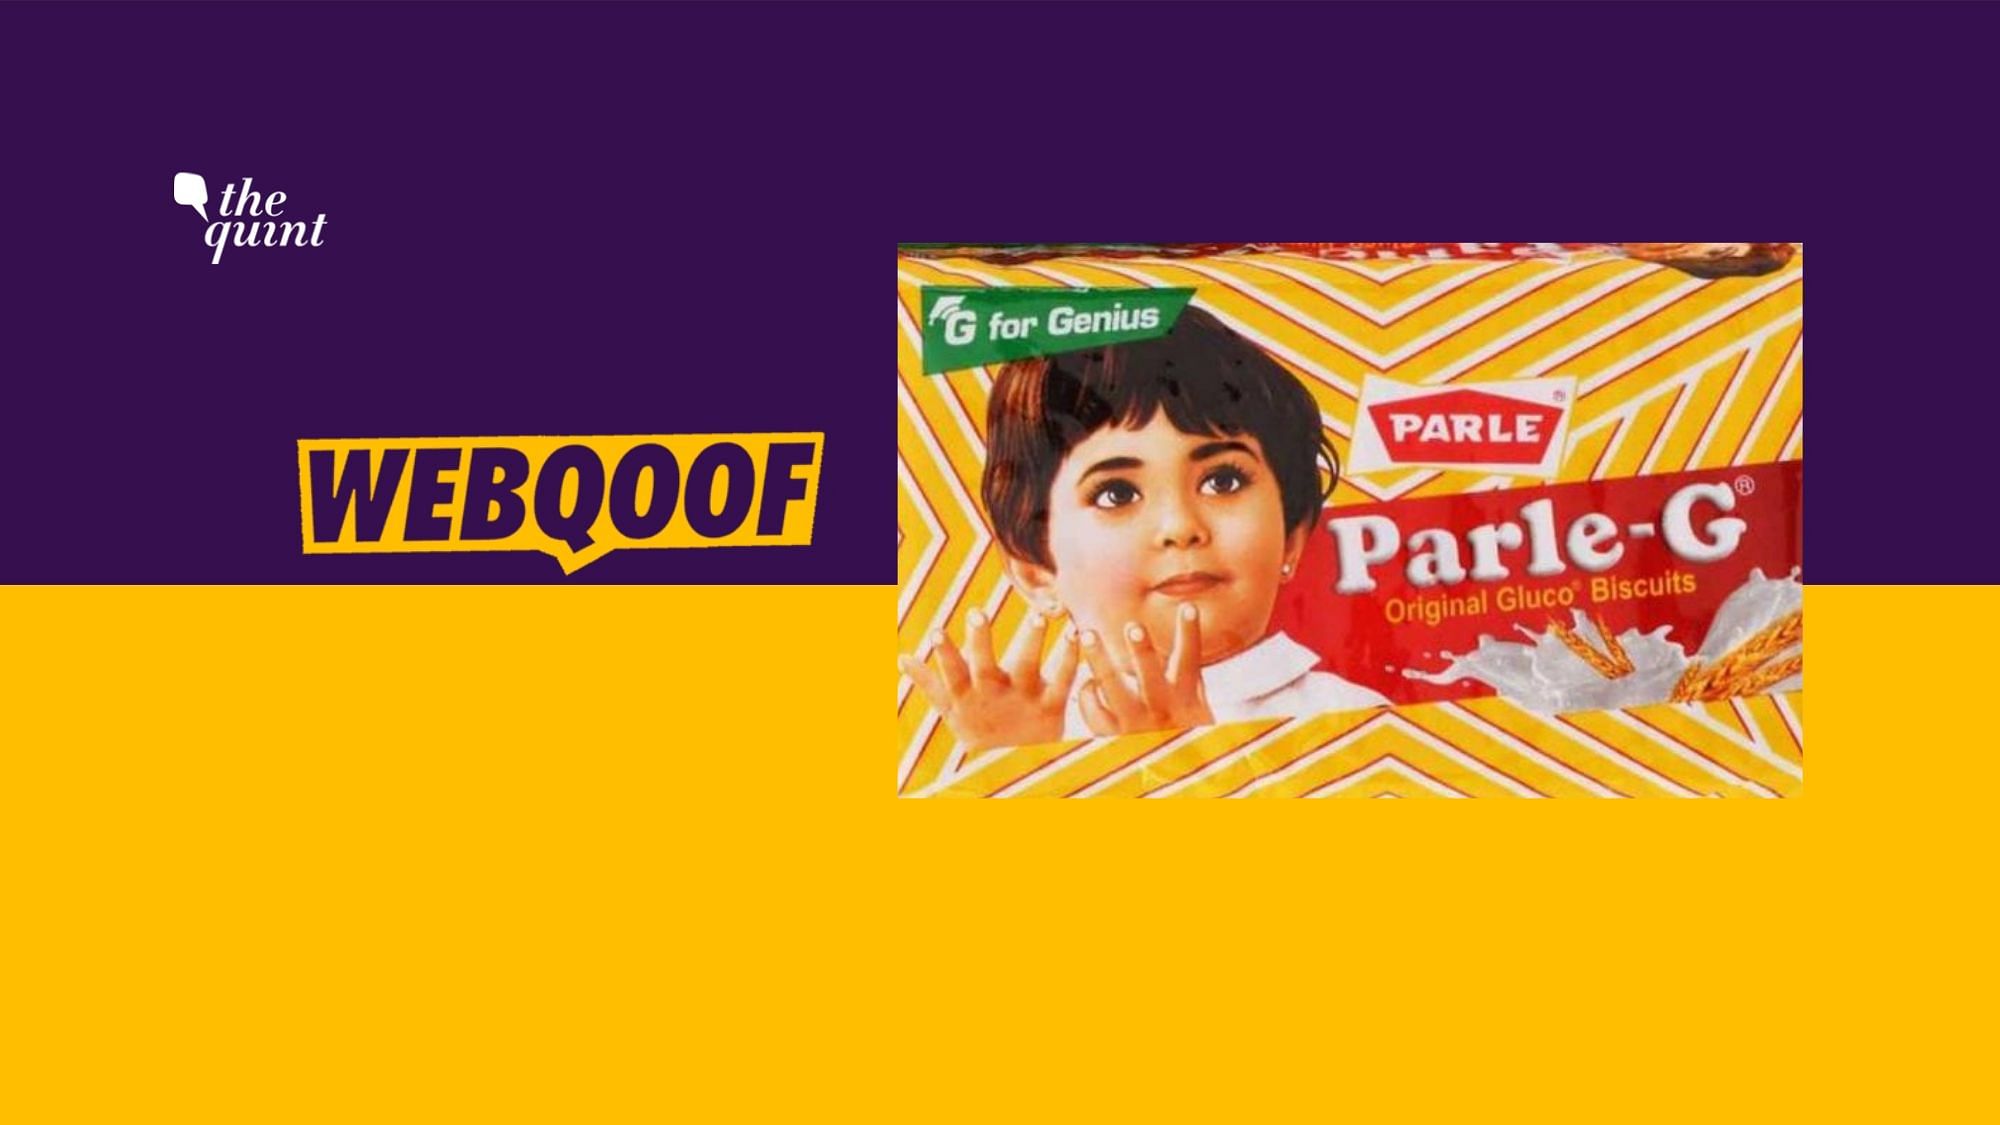 The tweet came after Parle Products announced they may lay off up to 10,000 employees after a slowdown in demand.